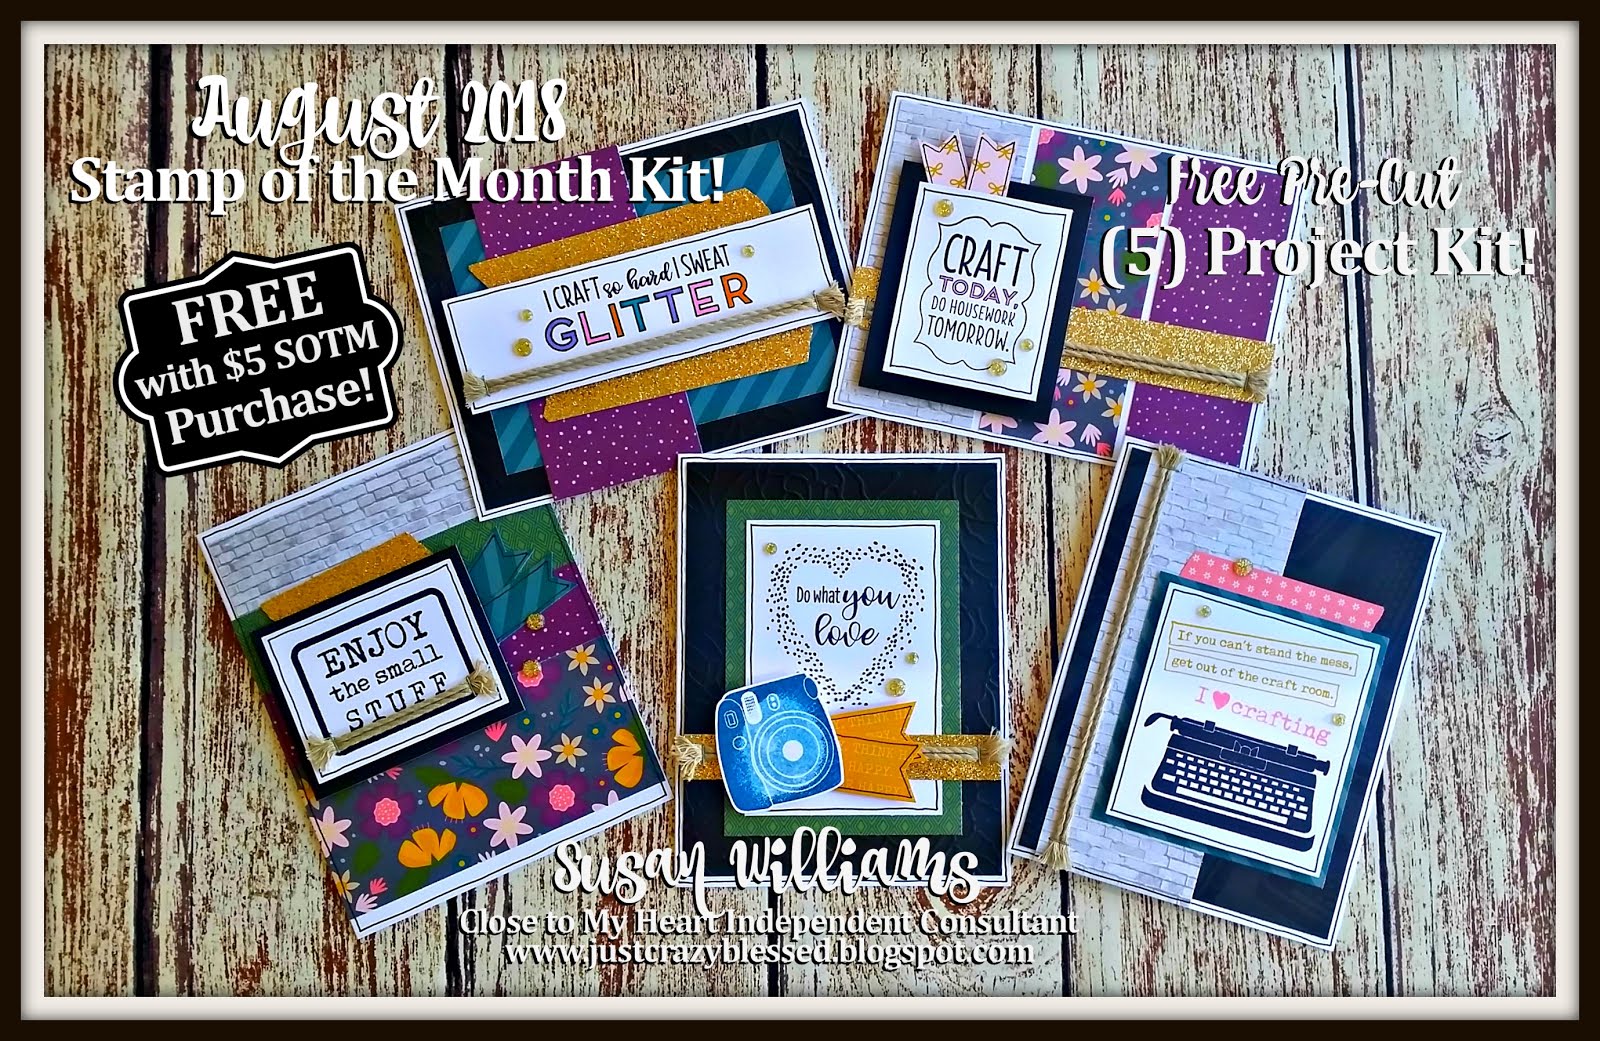 August 2018 Stamp of the Month Workshop!